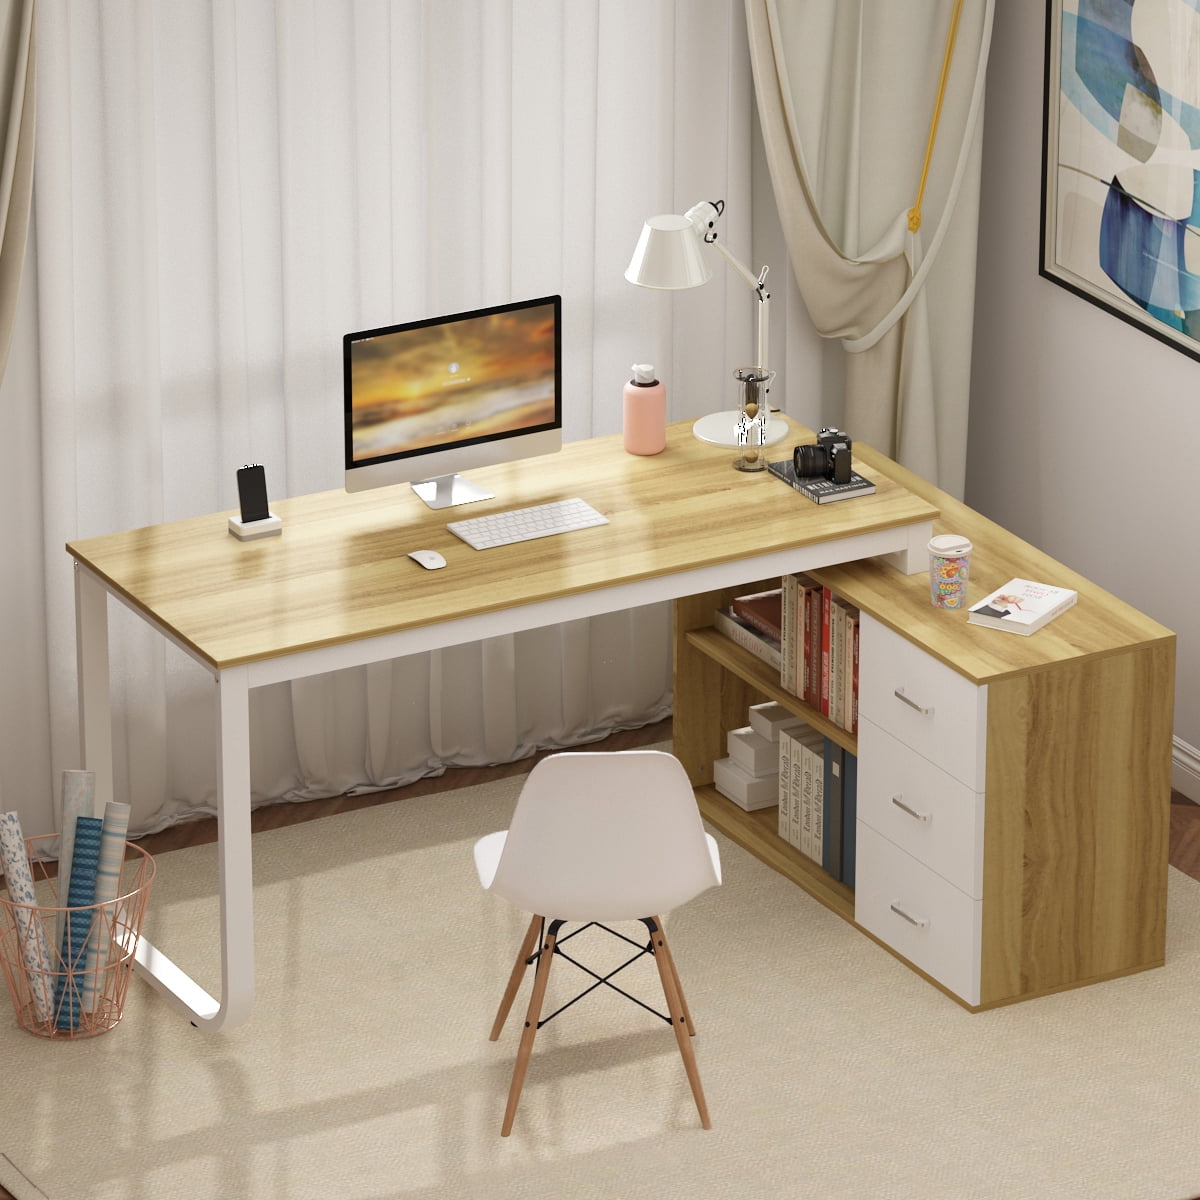 Hitow Home Office Desk, 55 Inch Wood and Metal Study Corner Desk ...